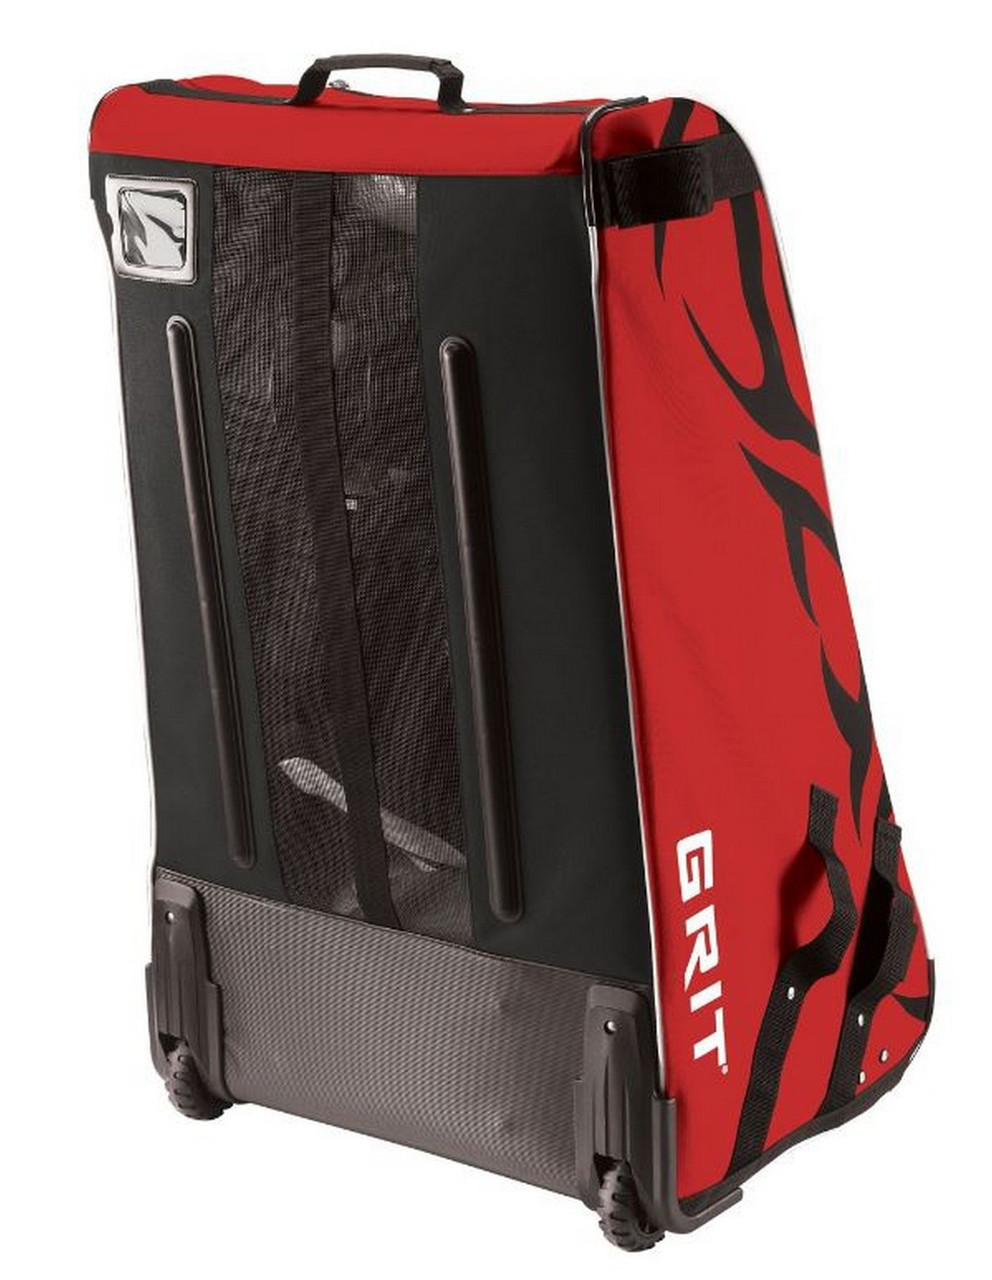 Grit Inc HTFX Hockey Tower 36" Wheeled Equipment Bag Red HTFX036-CH Chicago 